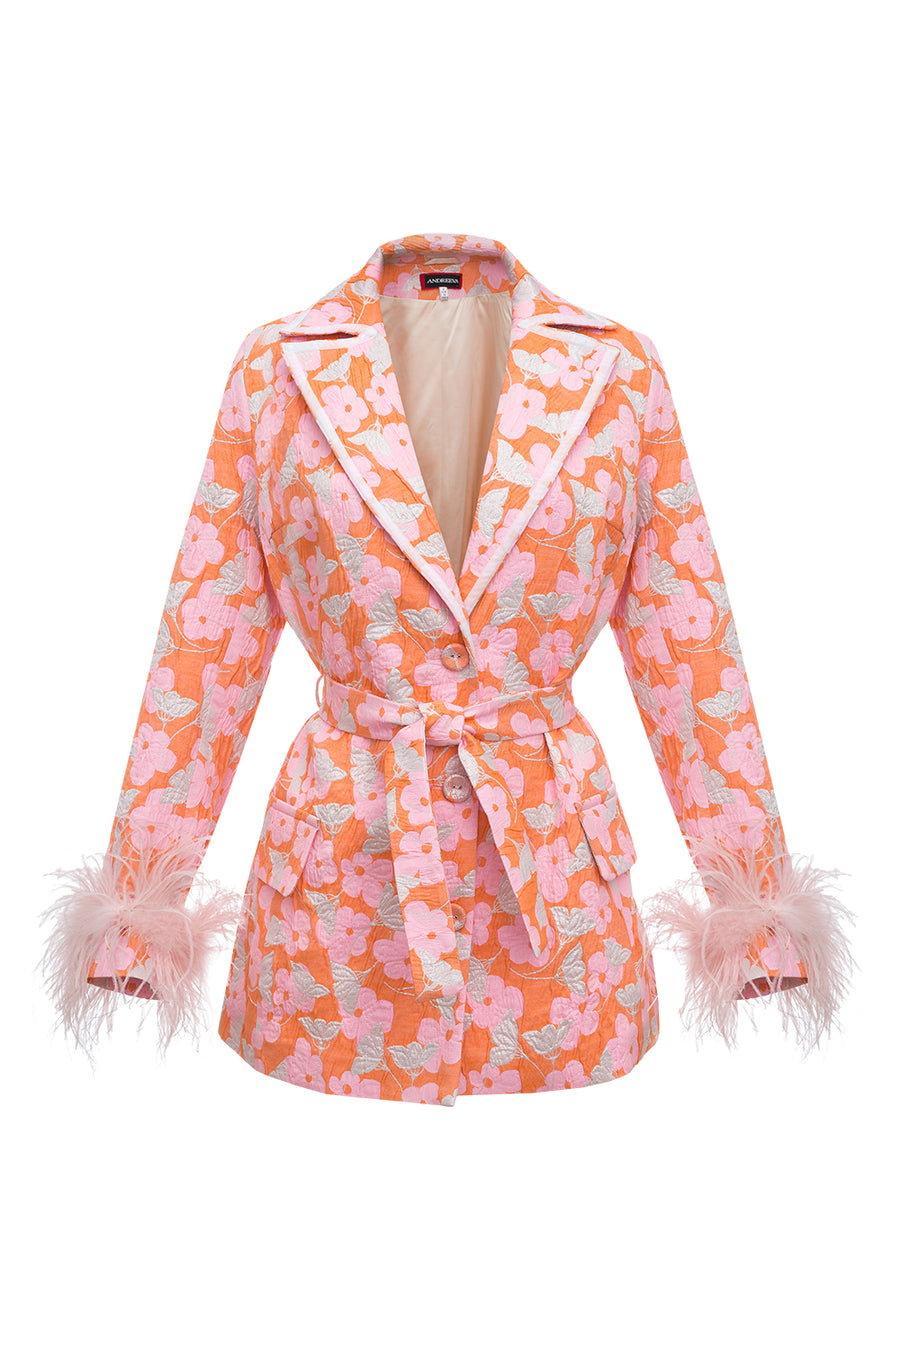 andreeva jacket with feathers cuffs